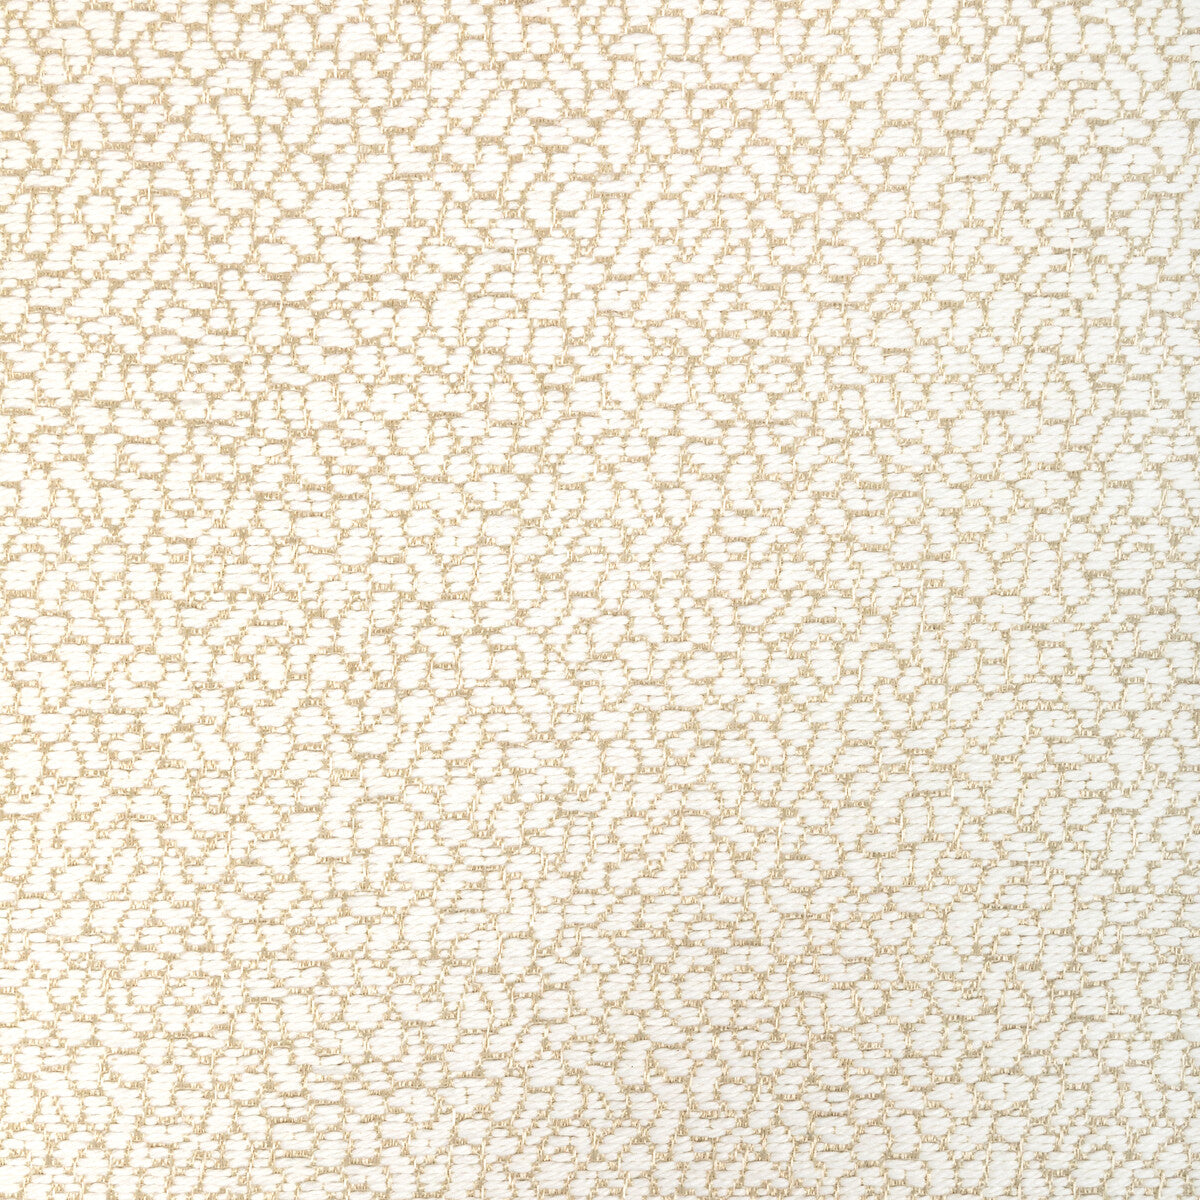 Kravet Design fabric in 36421-161 color - pattern 36421.161.0 - by Kravet Design in the Performance Crypton Home collection